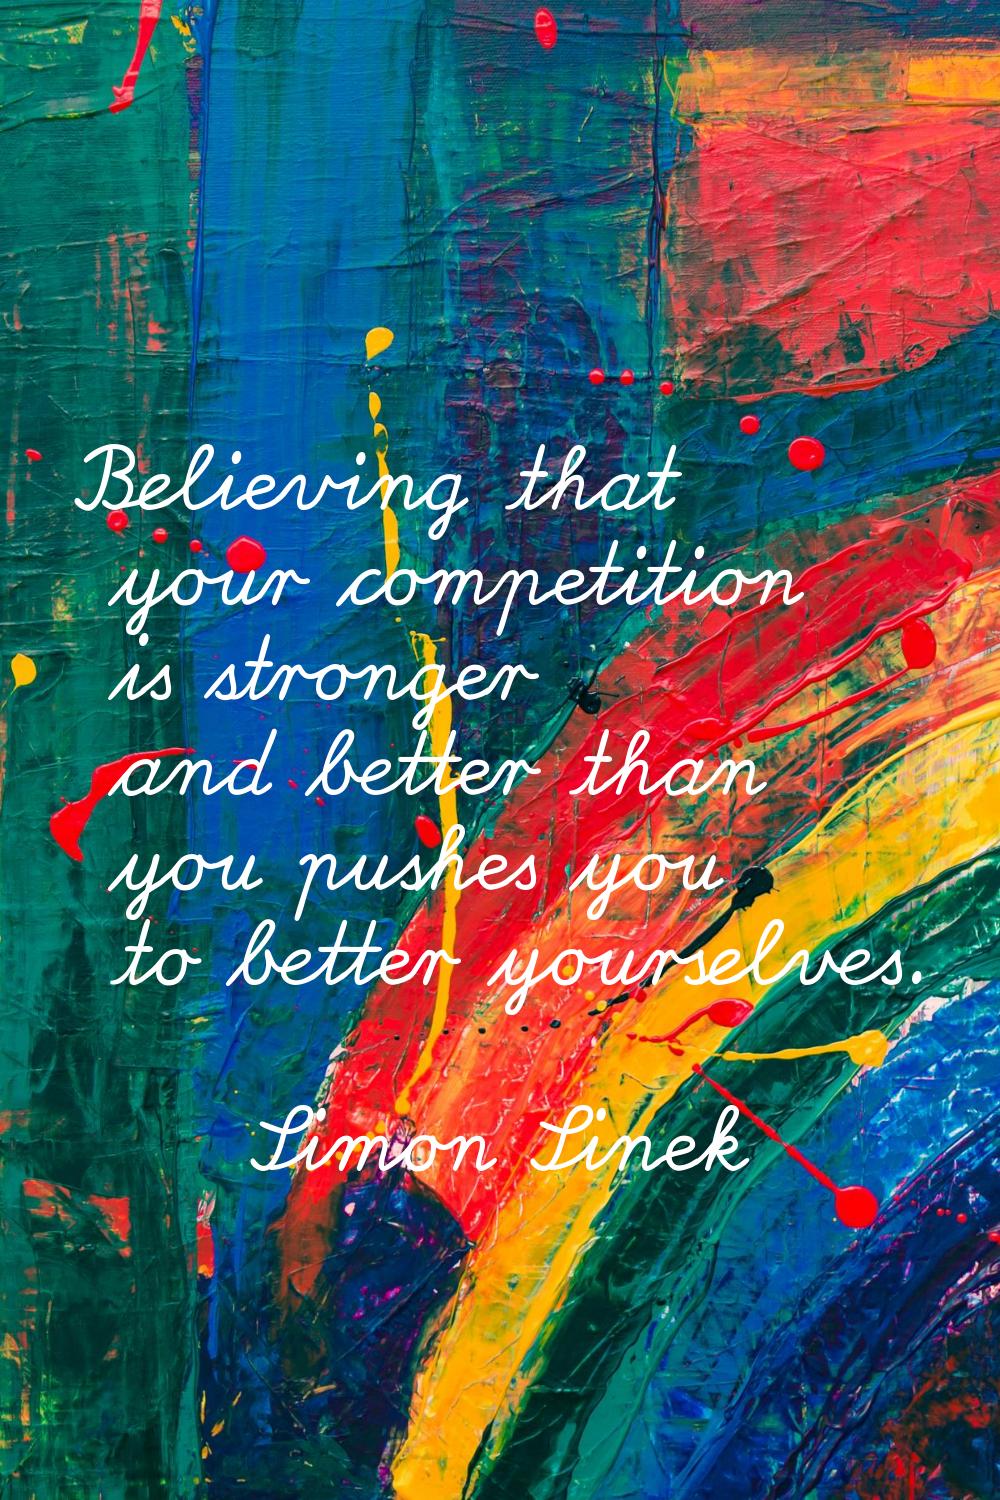 Believing that your competition is stronger and better than you pushes you to better yourselves.